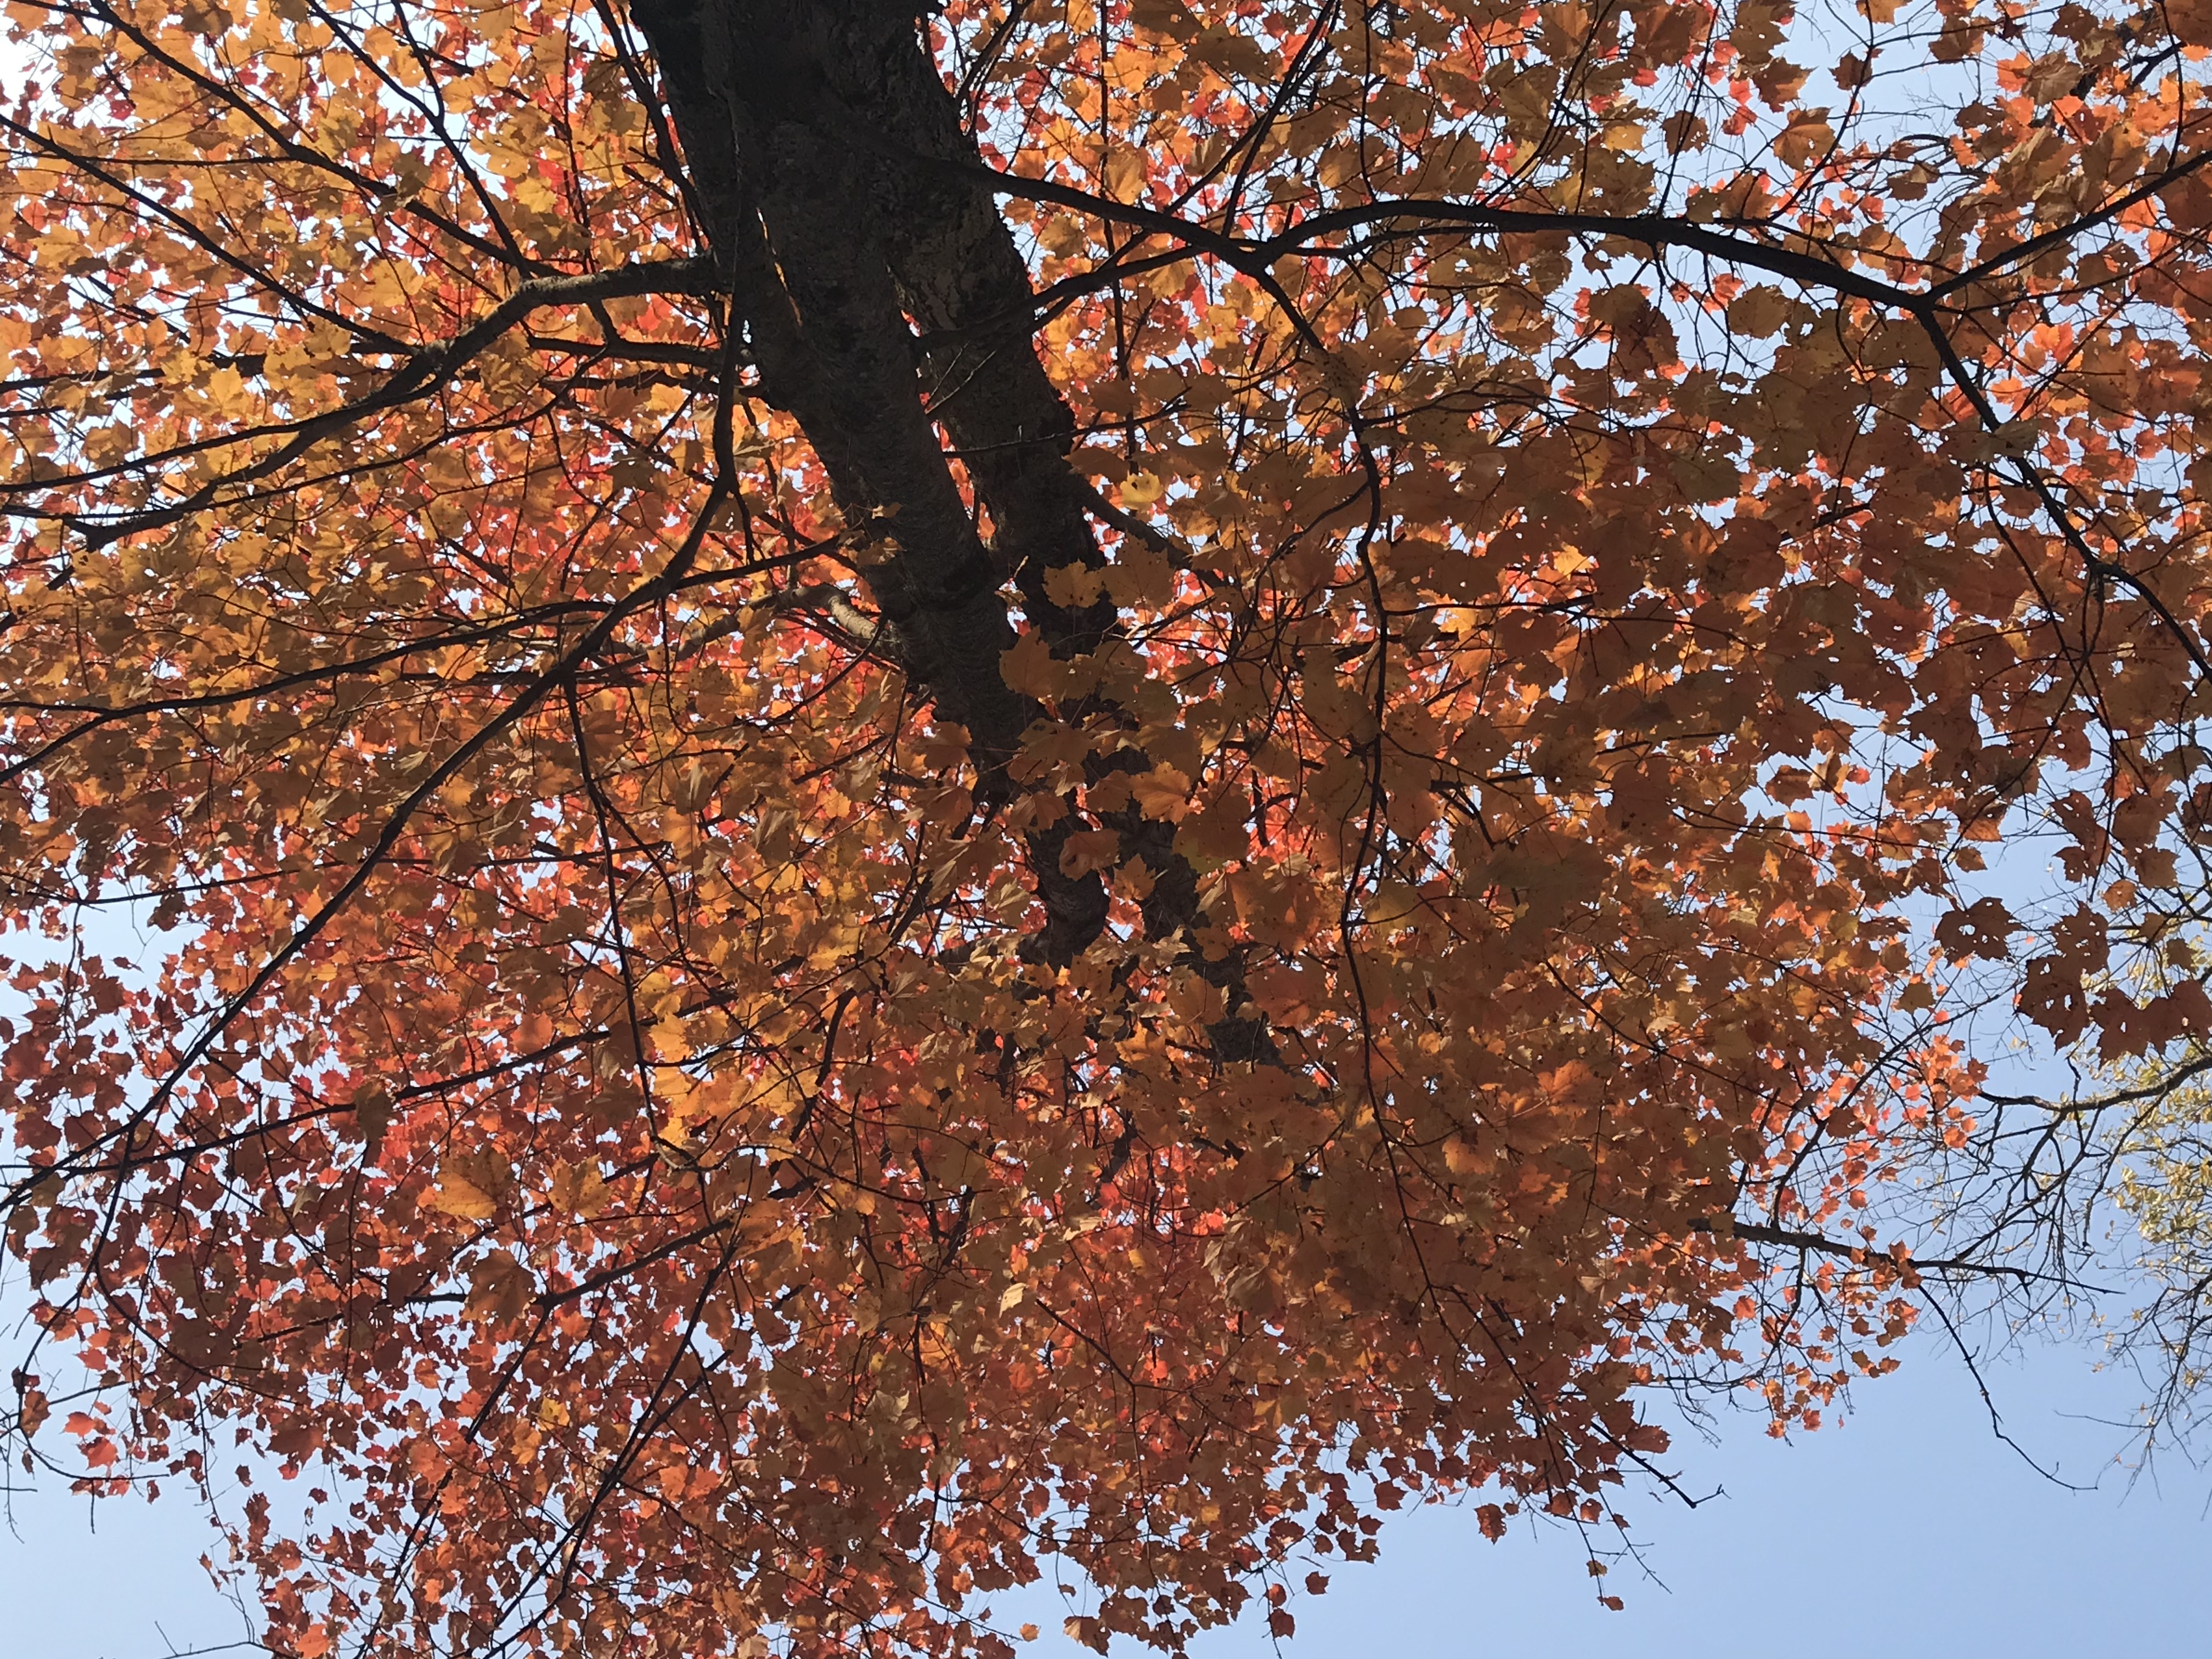 Looking up the trunk of a red maple tree with beautiful leaves